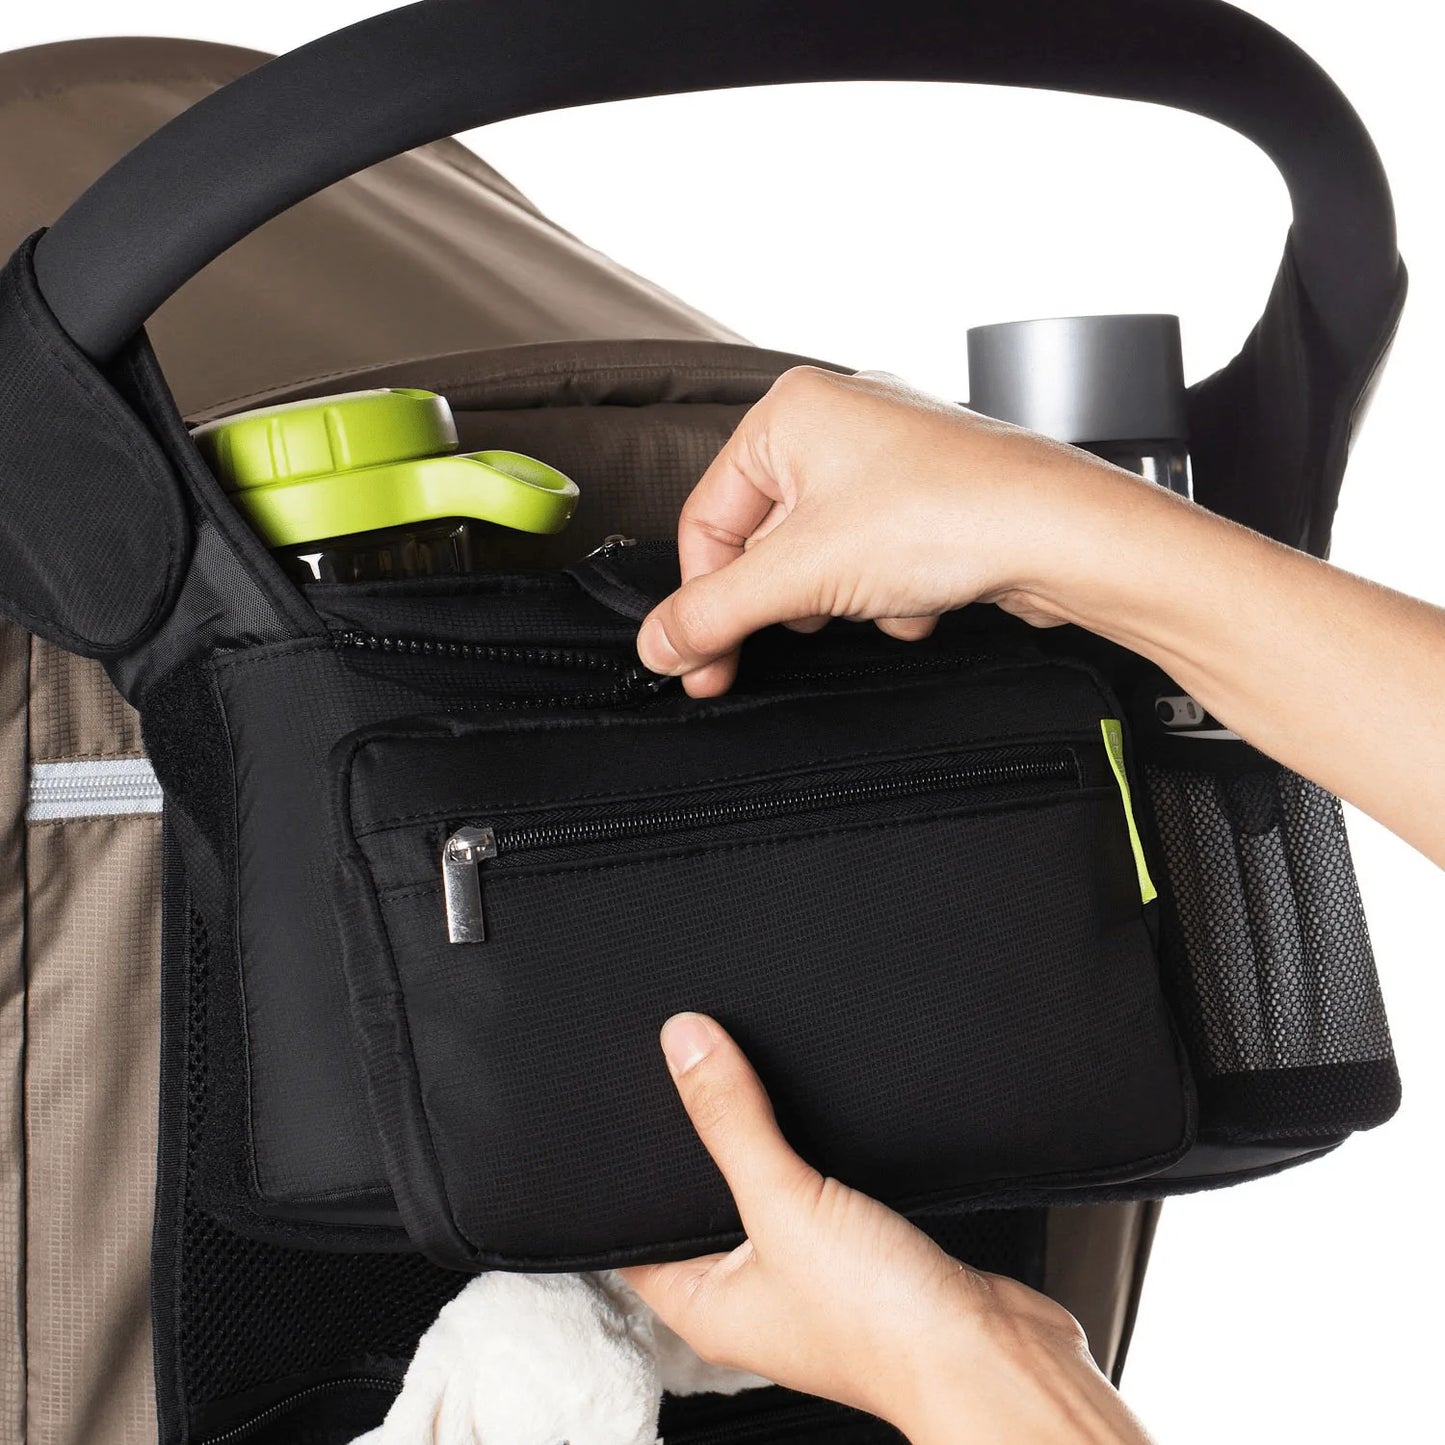 Ethan & Emma Universal Baby Stroller Organizer with Insulated Cup Holders for Smart Moms. Diaper Storage, Secure Straps, Detachable Bag, Pockets for Phone, Keys, Toys. Compact Design Fit All Strollers Animals & Pet Supplies > Pet Supplies > Dog Supplies > Dog Treadmills Ethan & Emma   